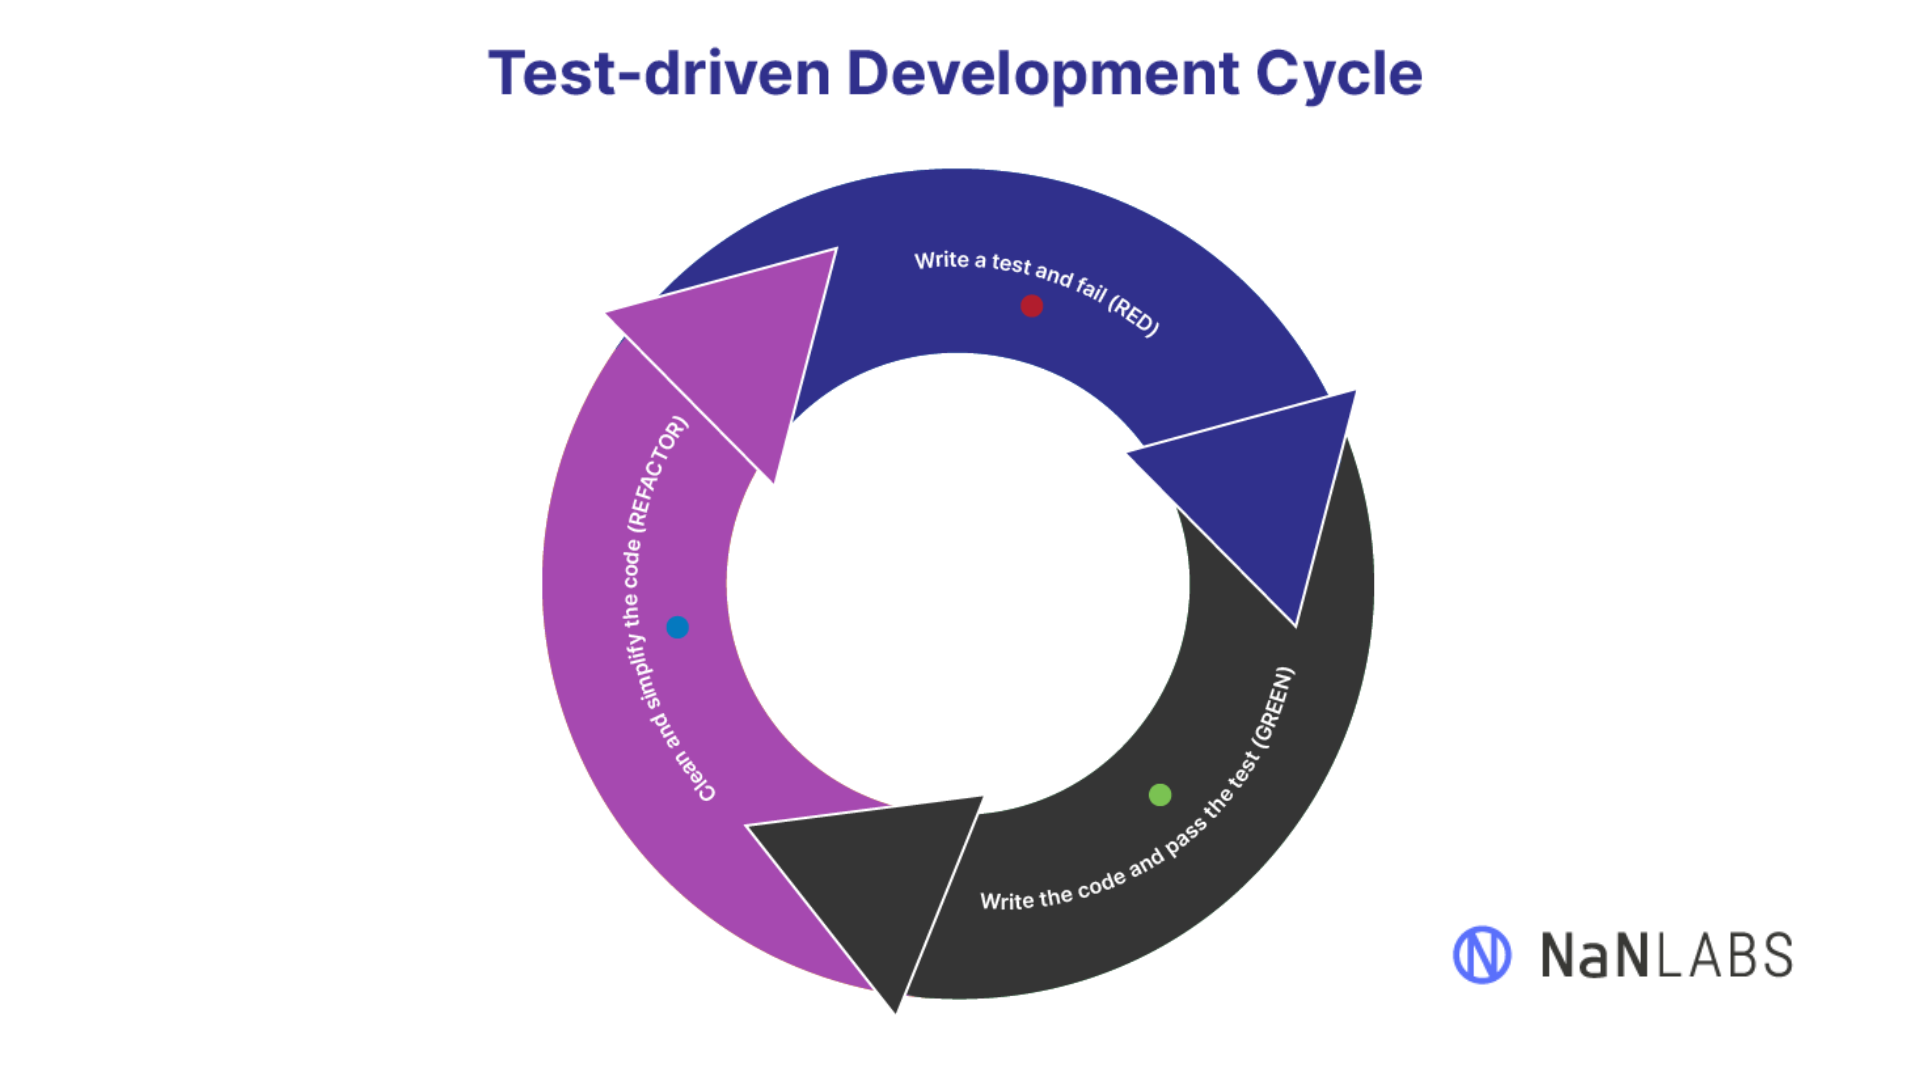 Guide to Agile technical practices - the test-driven development cycle